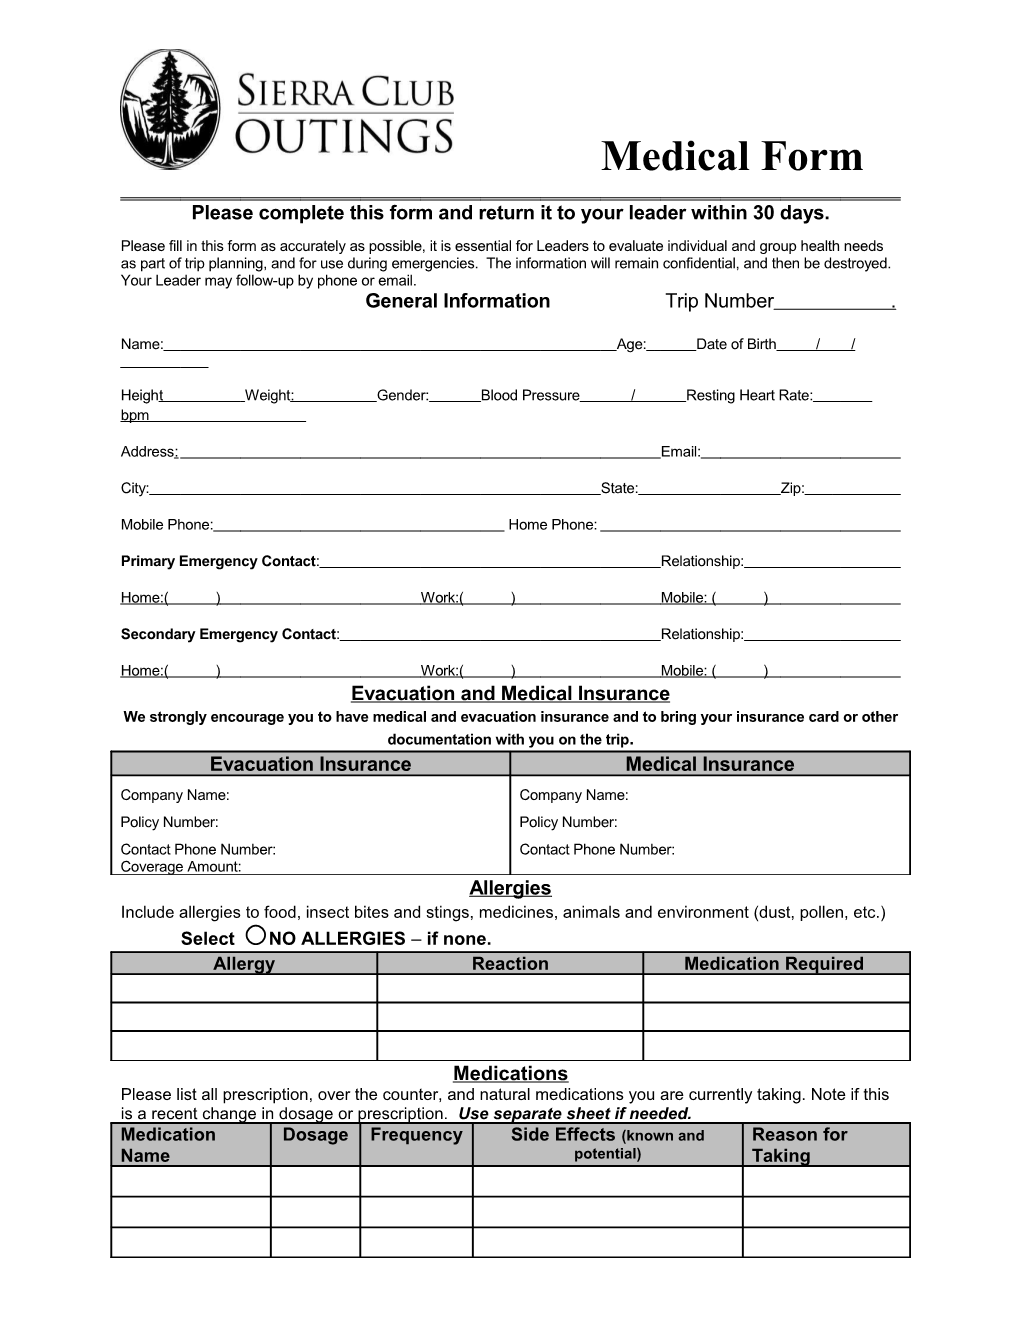 Please Complete This Form and Return It to Your Leader Within 30 Days